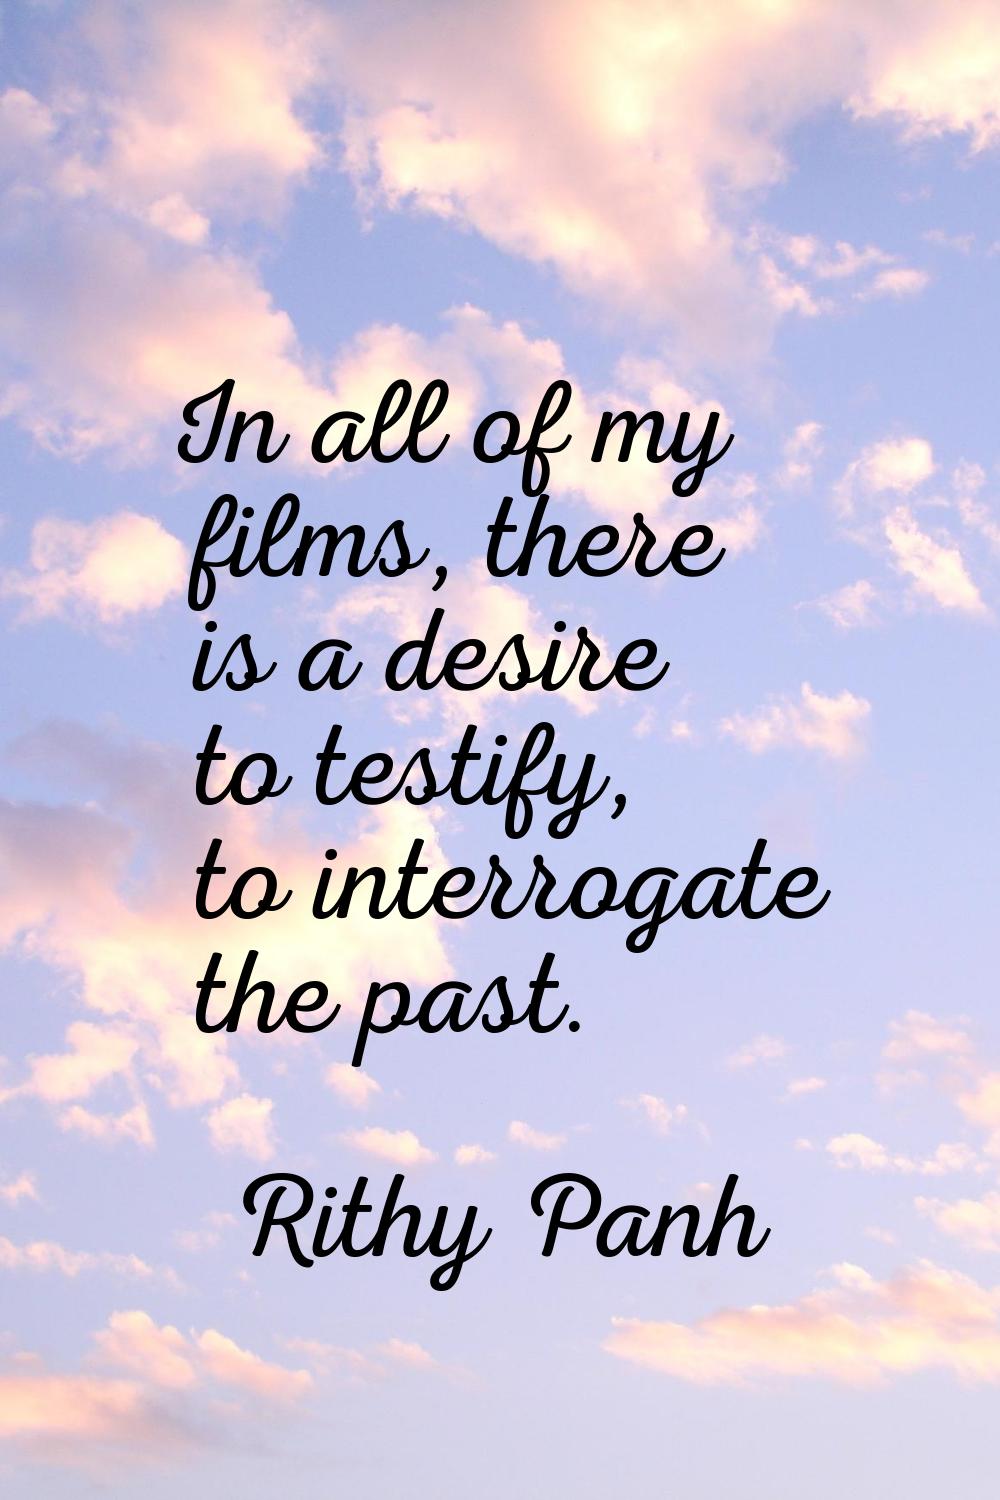 In all of my films, there is a desire to testify, to interrogate the past.